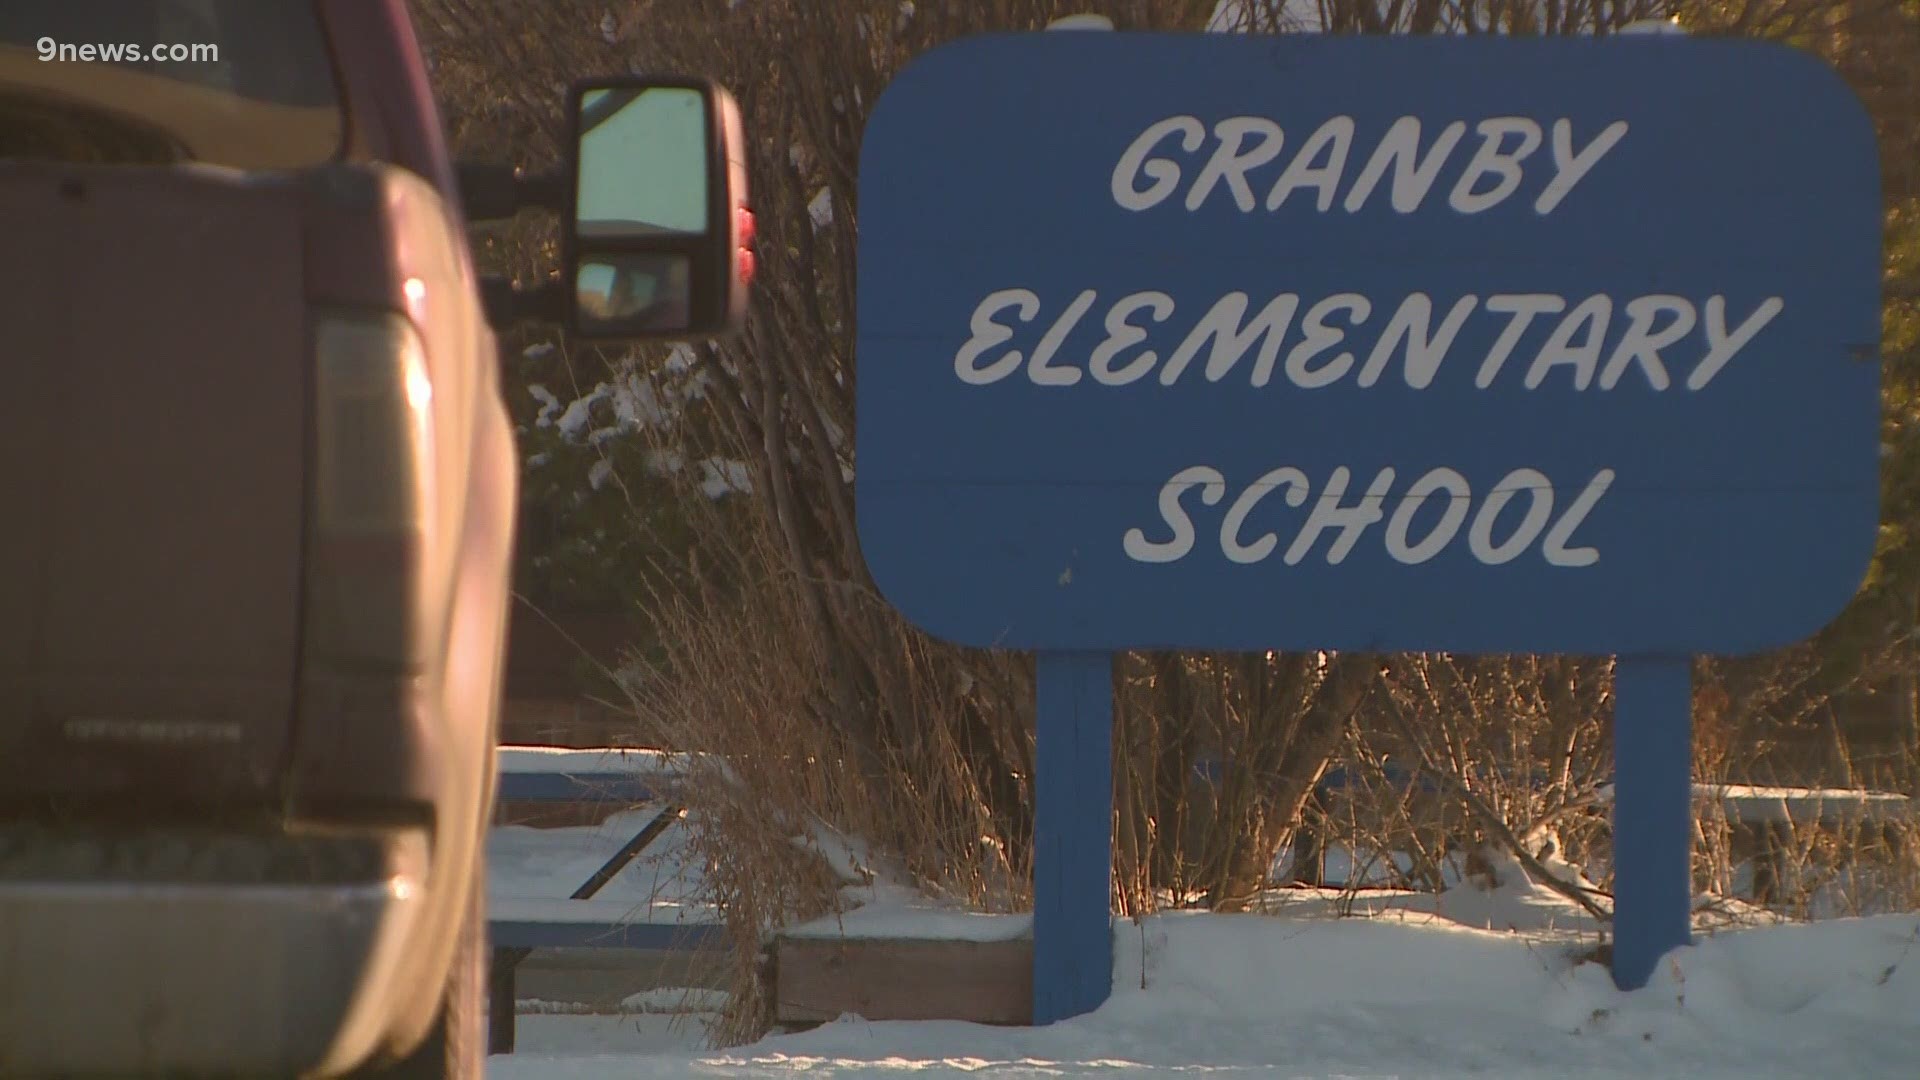 School leaders in Grand County announced they would reopen schools on Monday after fires in the area forced evacuations.